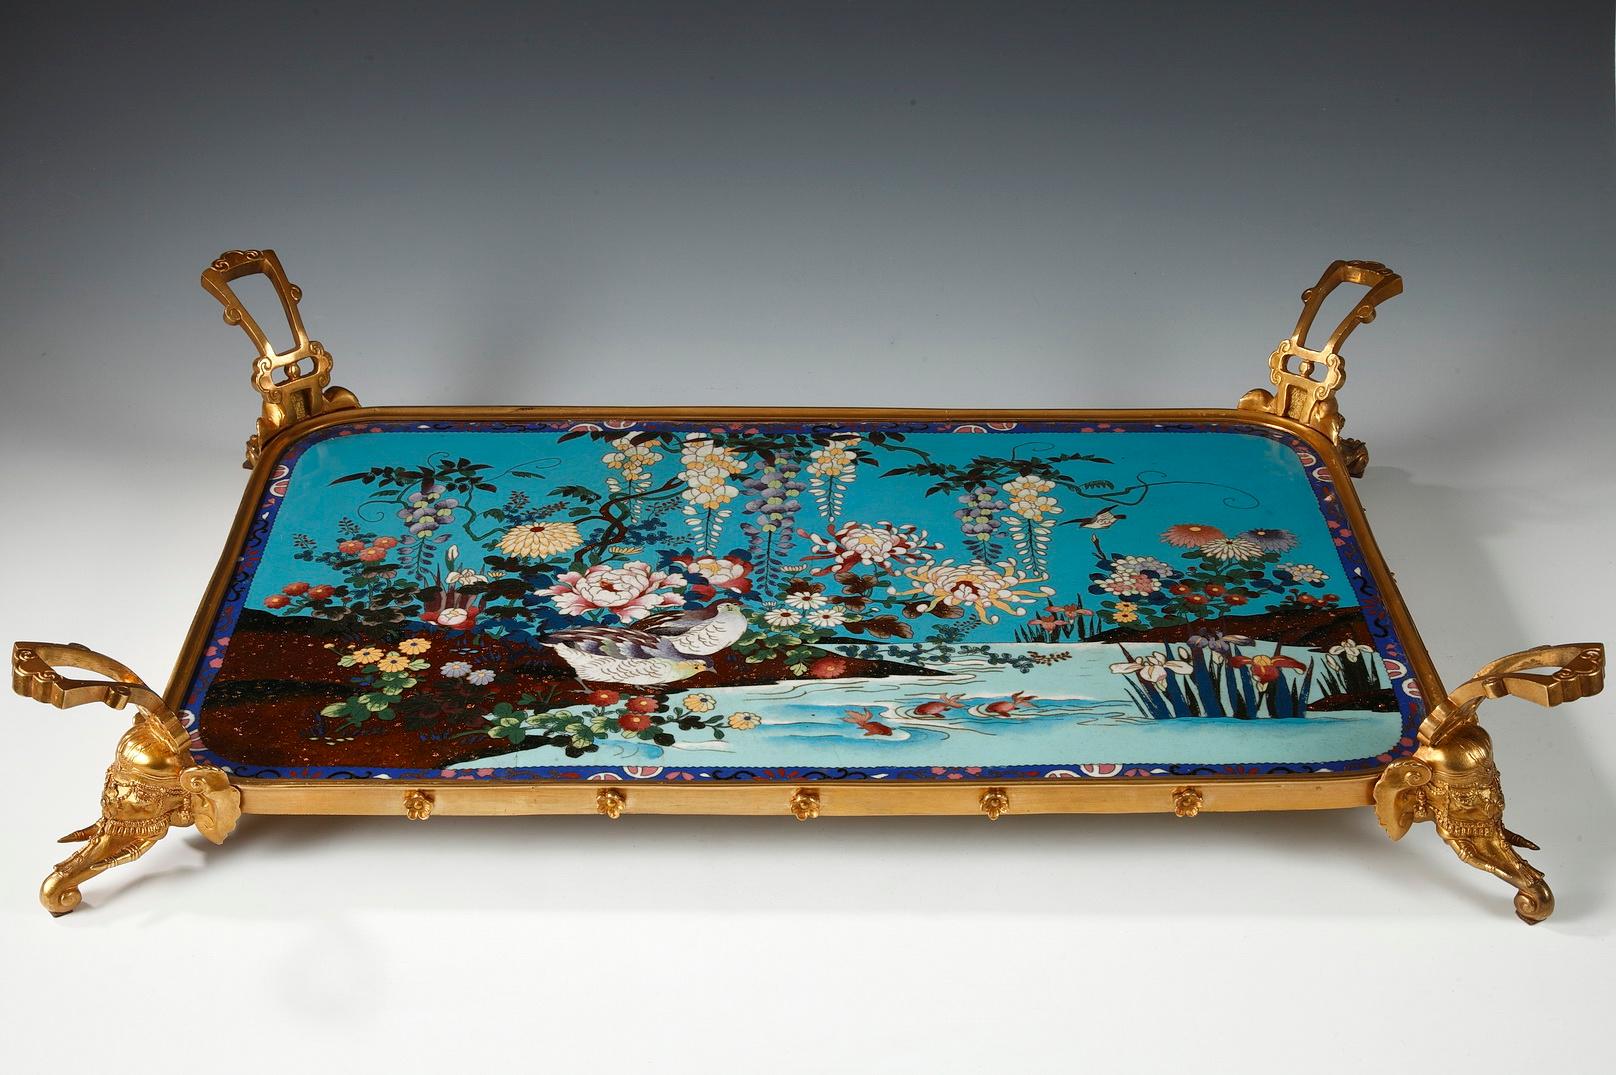 Rich landscape in cloisonné enamel on blue and brown background imitating Aventurine stone, attributed to L.C. Sevin and F. Barbedienne. The decor represents a river surrounded by wisterias, chrysanthemums, peonies, iris and reeds, led by birds and